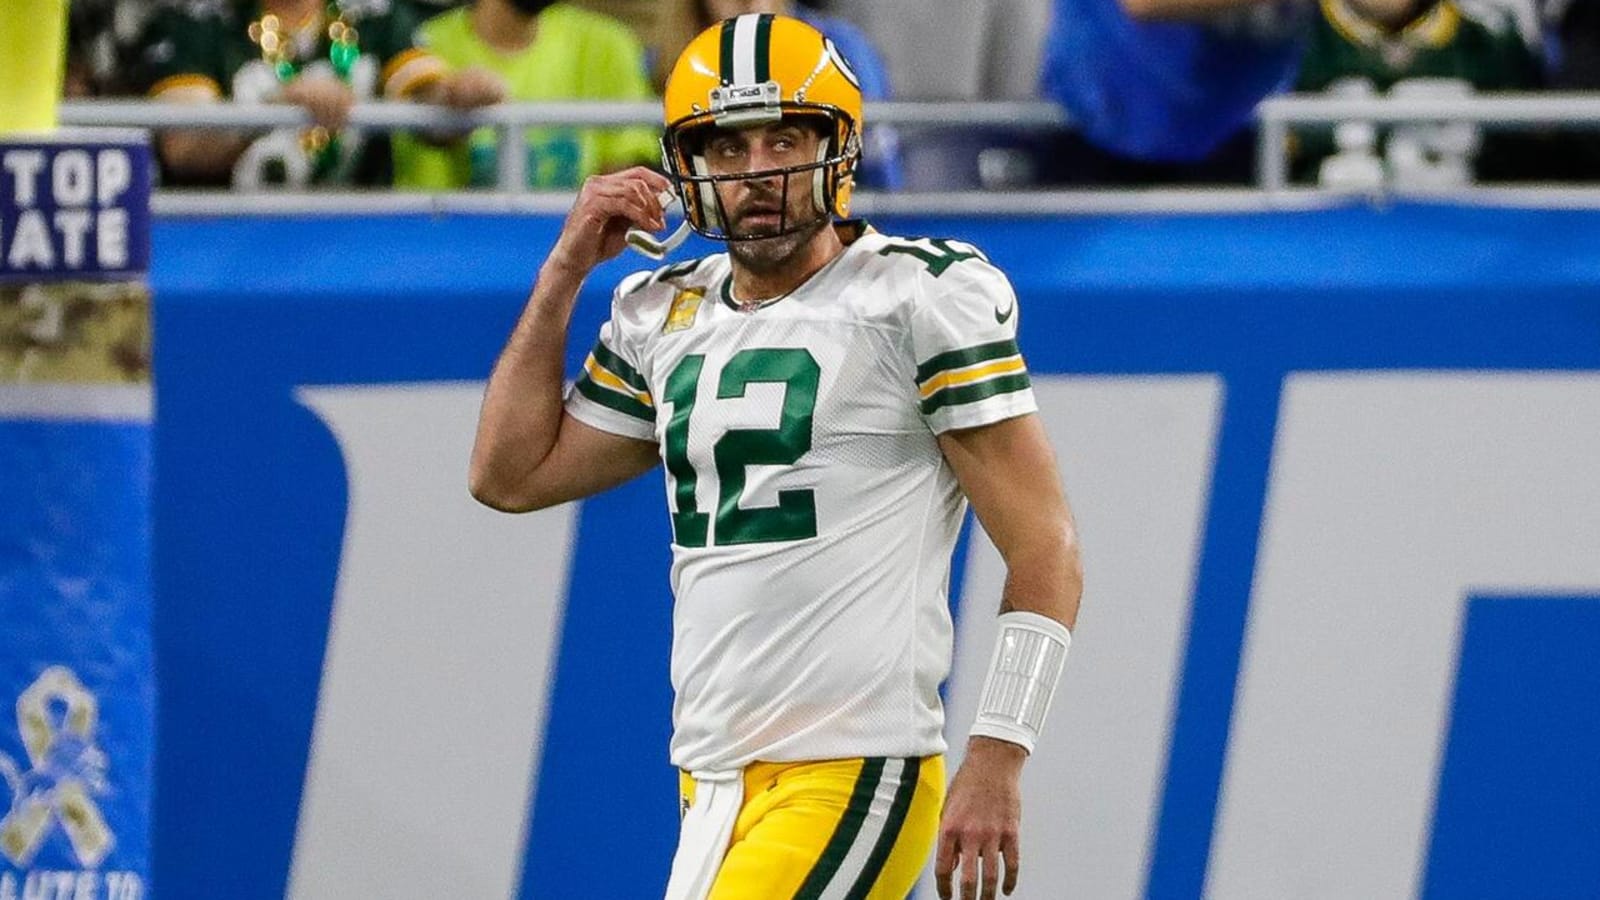 Rodgers experiencing flashbacks to his first year as starter